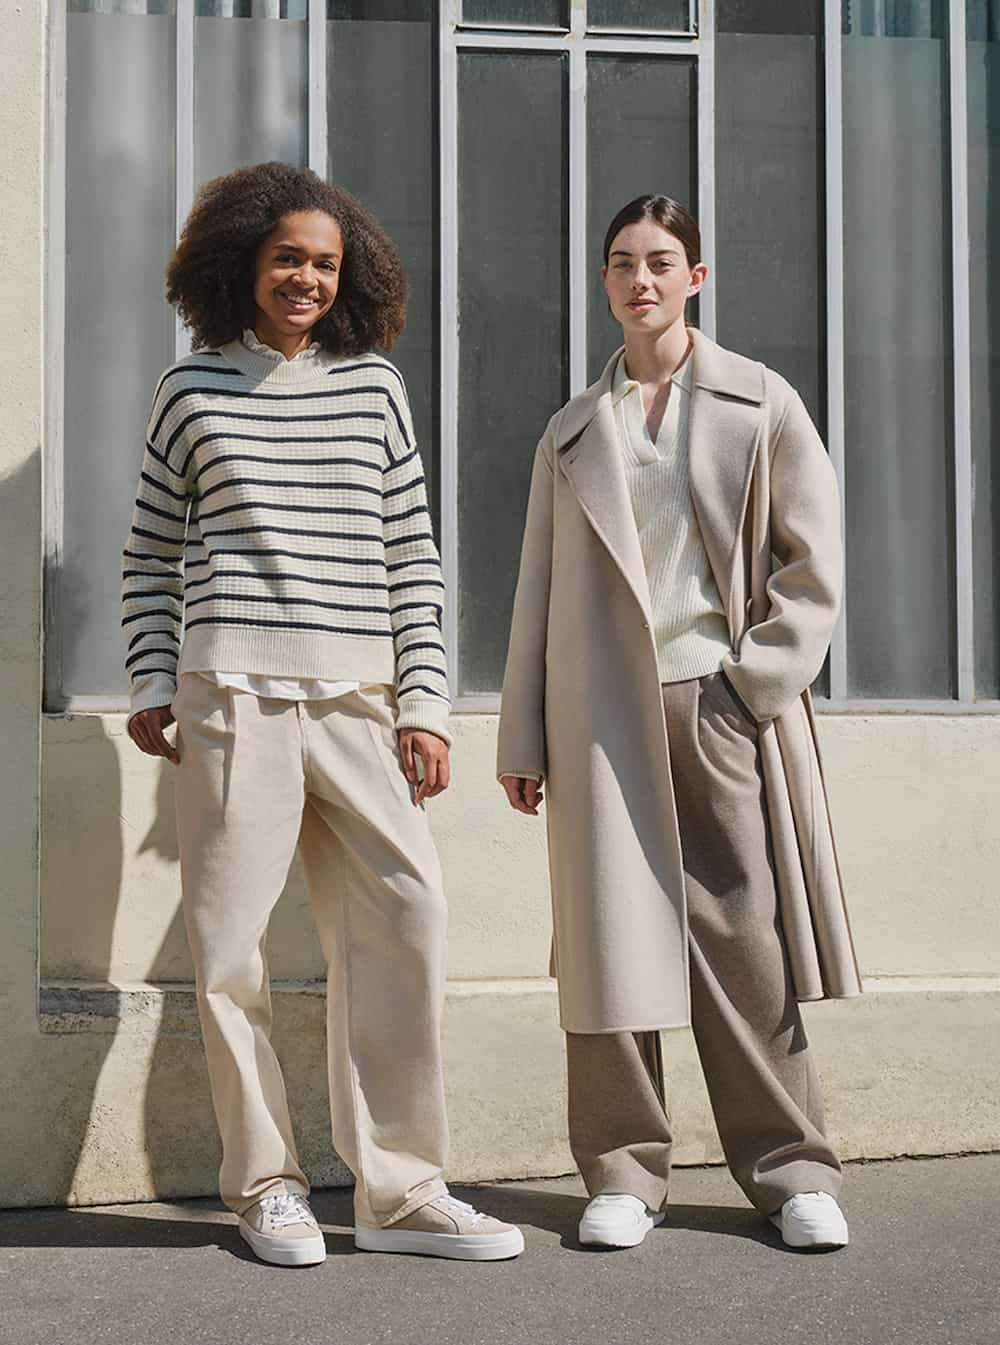 two women wearing neutral outfits with beige trousers, striped sweaters, and beige wool coat from Uniqlo, a store like Everlane